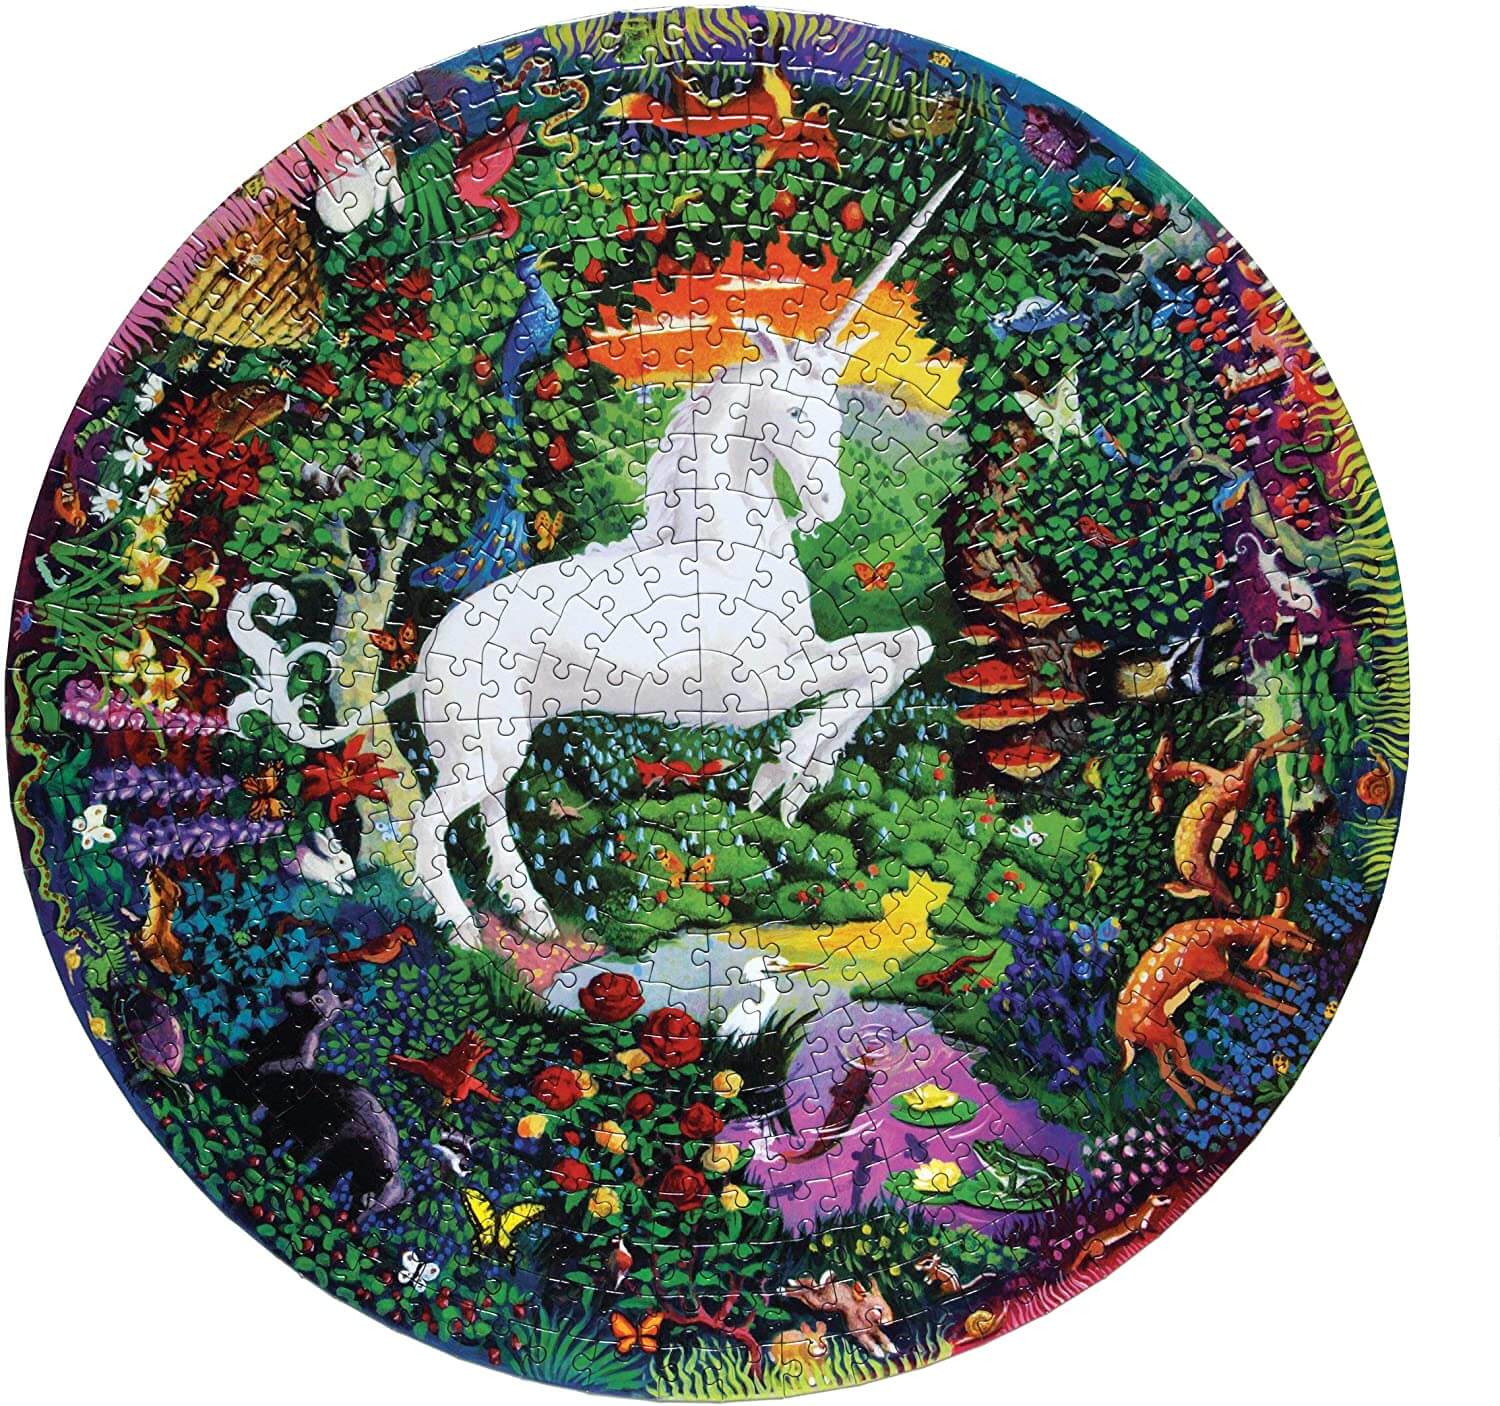 eeBoo - Piece and Love Unicorn Garden 500 Piece Round Circle Jigsaw Puzzle completed 